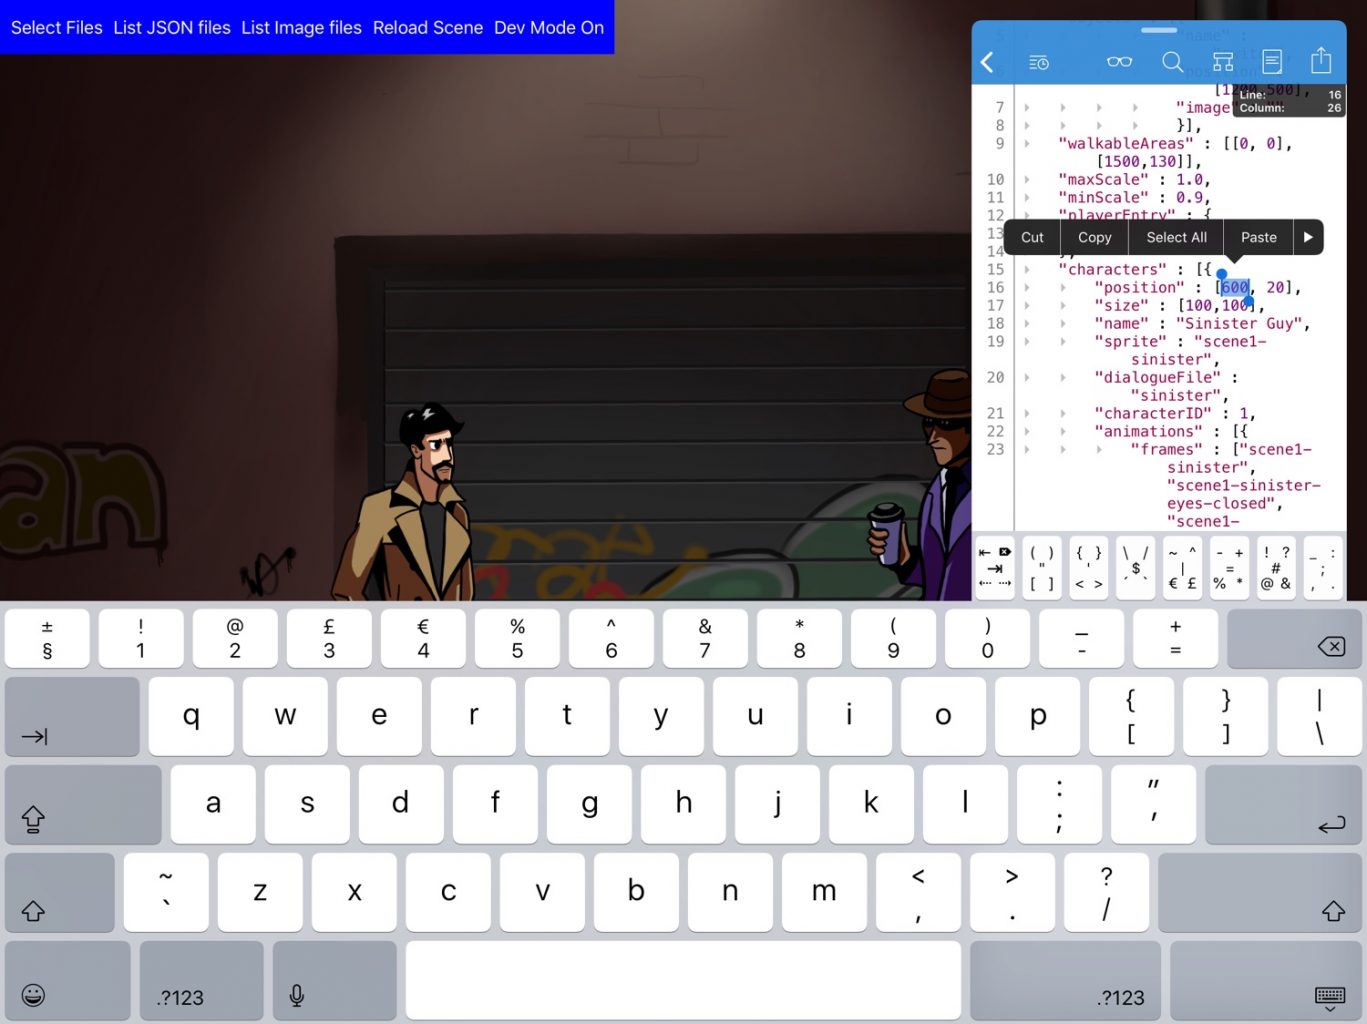 A screenshot of my adventure game scene. Textastic is open over it and the scene file is being edited. The non-player character's position is being changed.